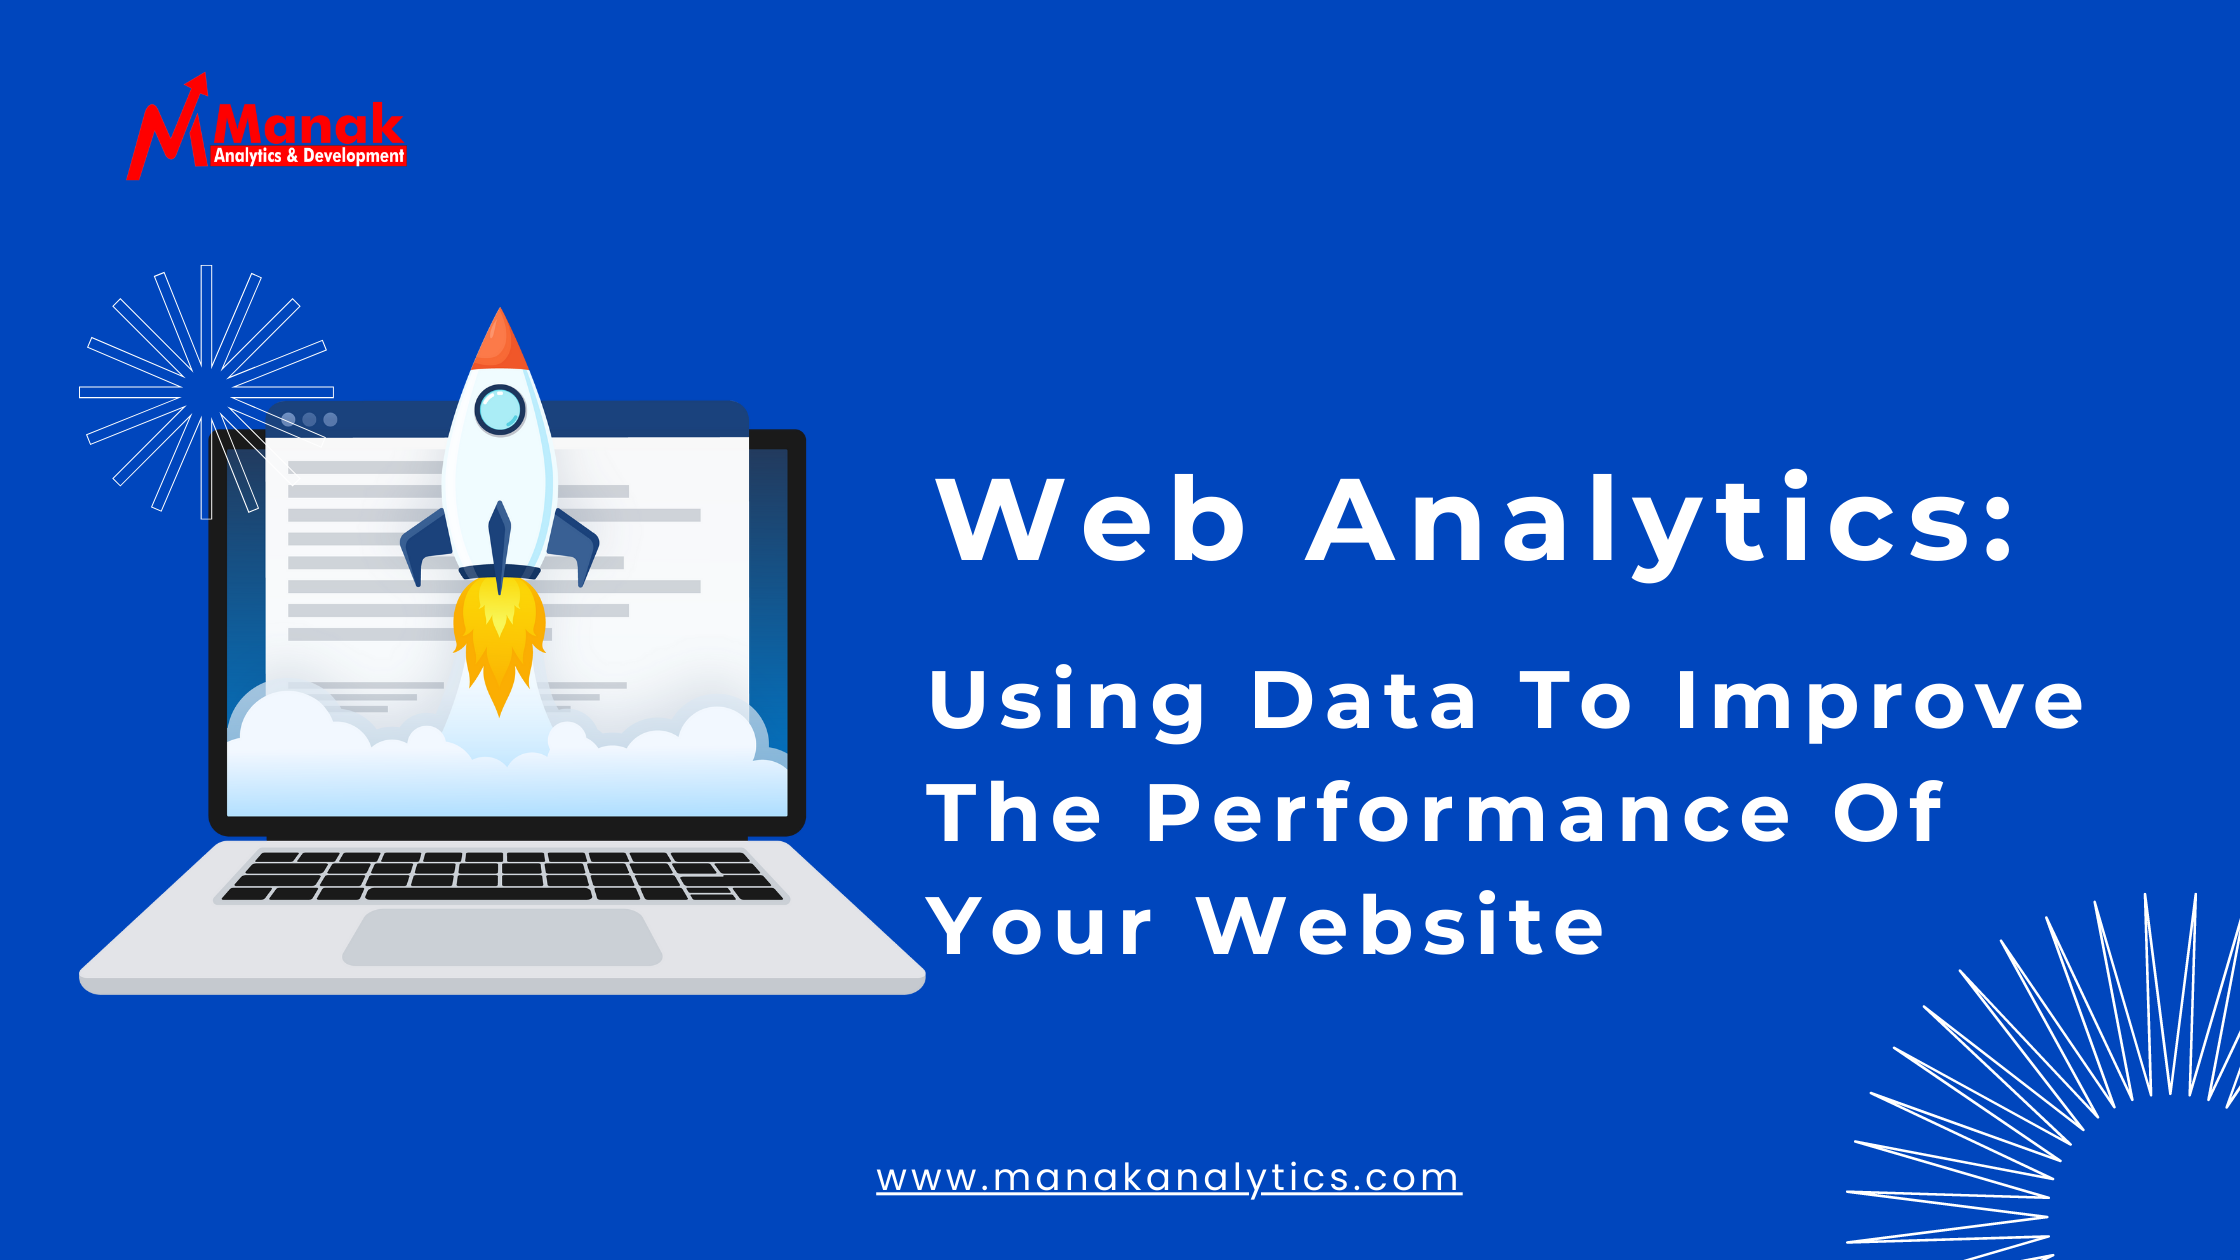 Web Analytics: Using Data To Improve The Performance Of Your Website